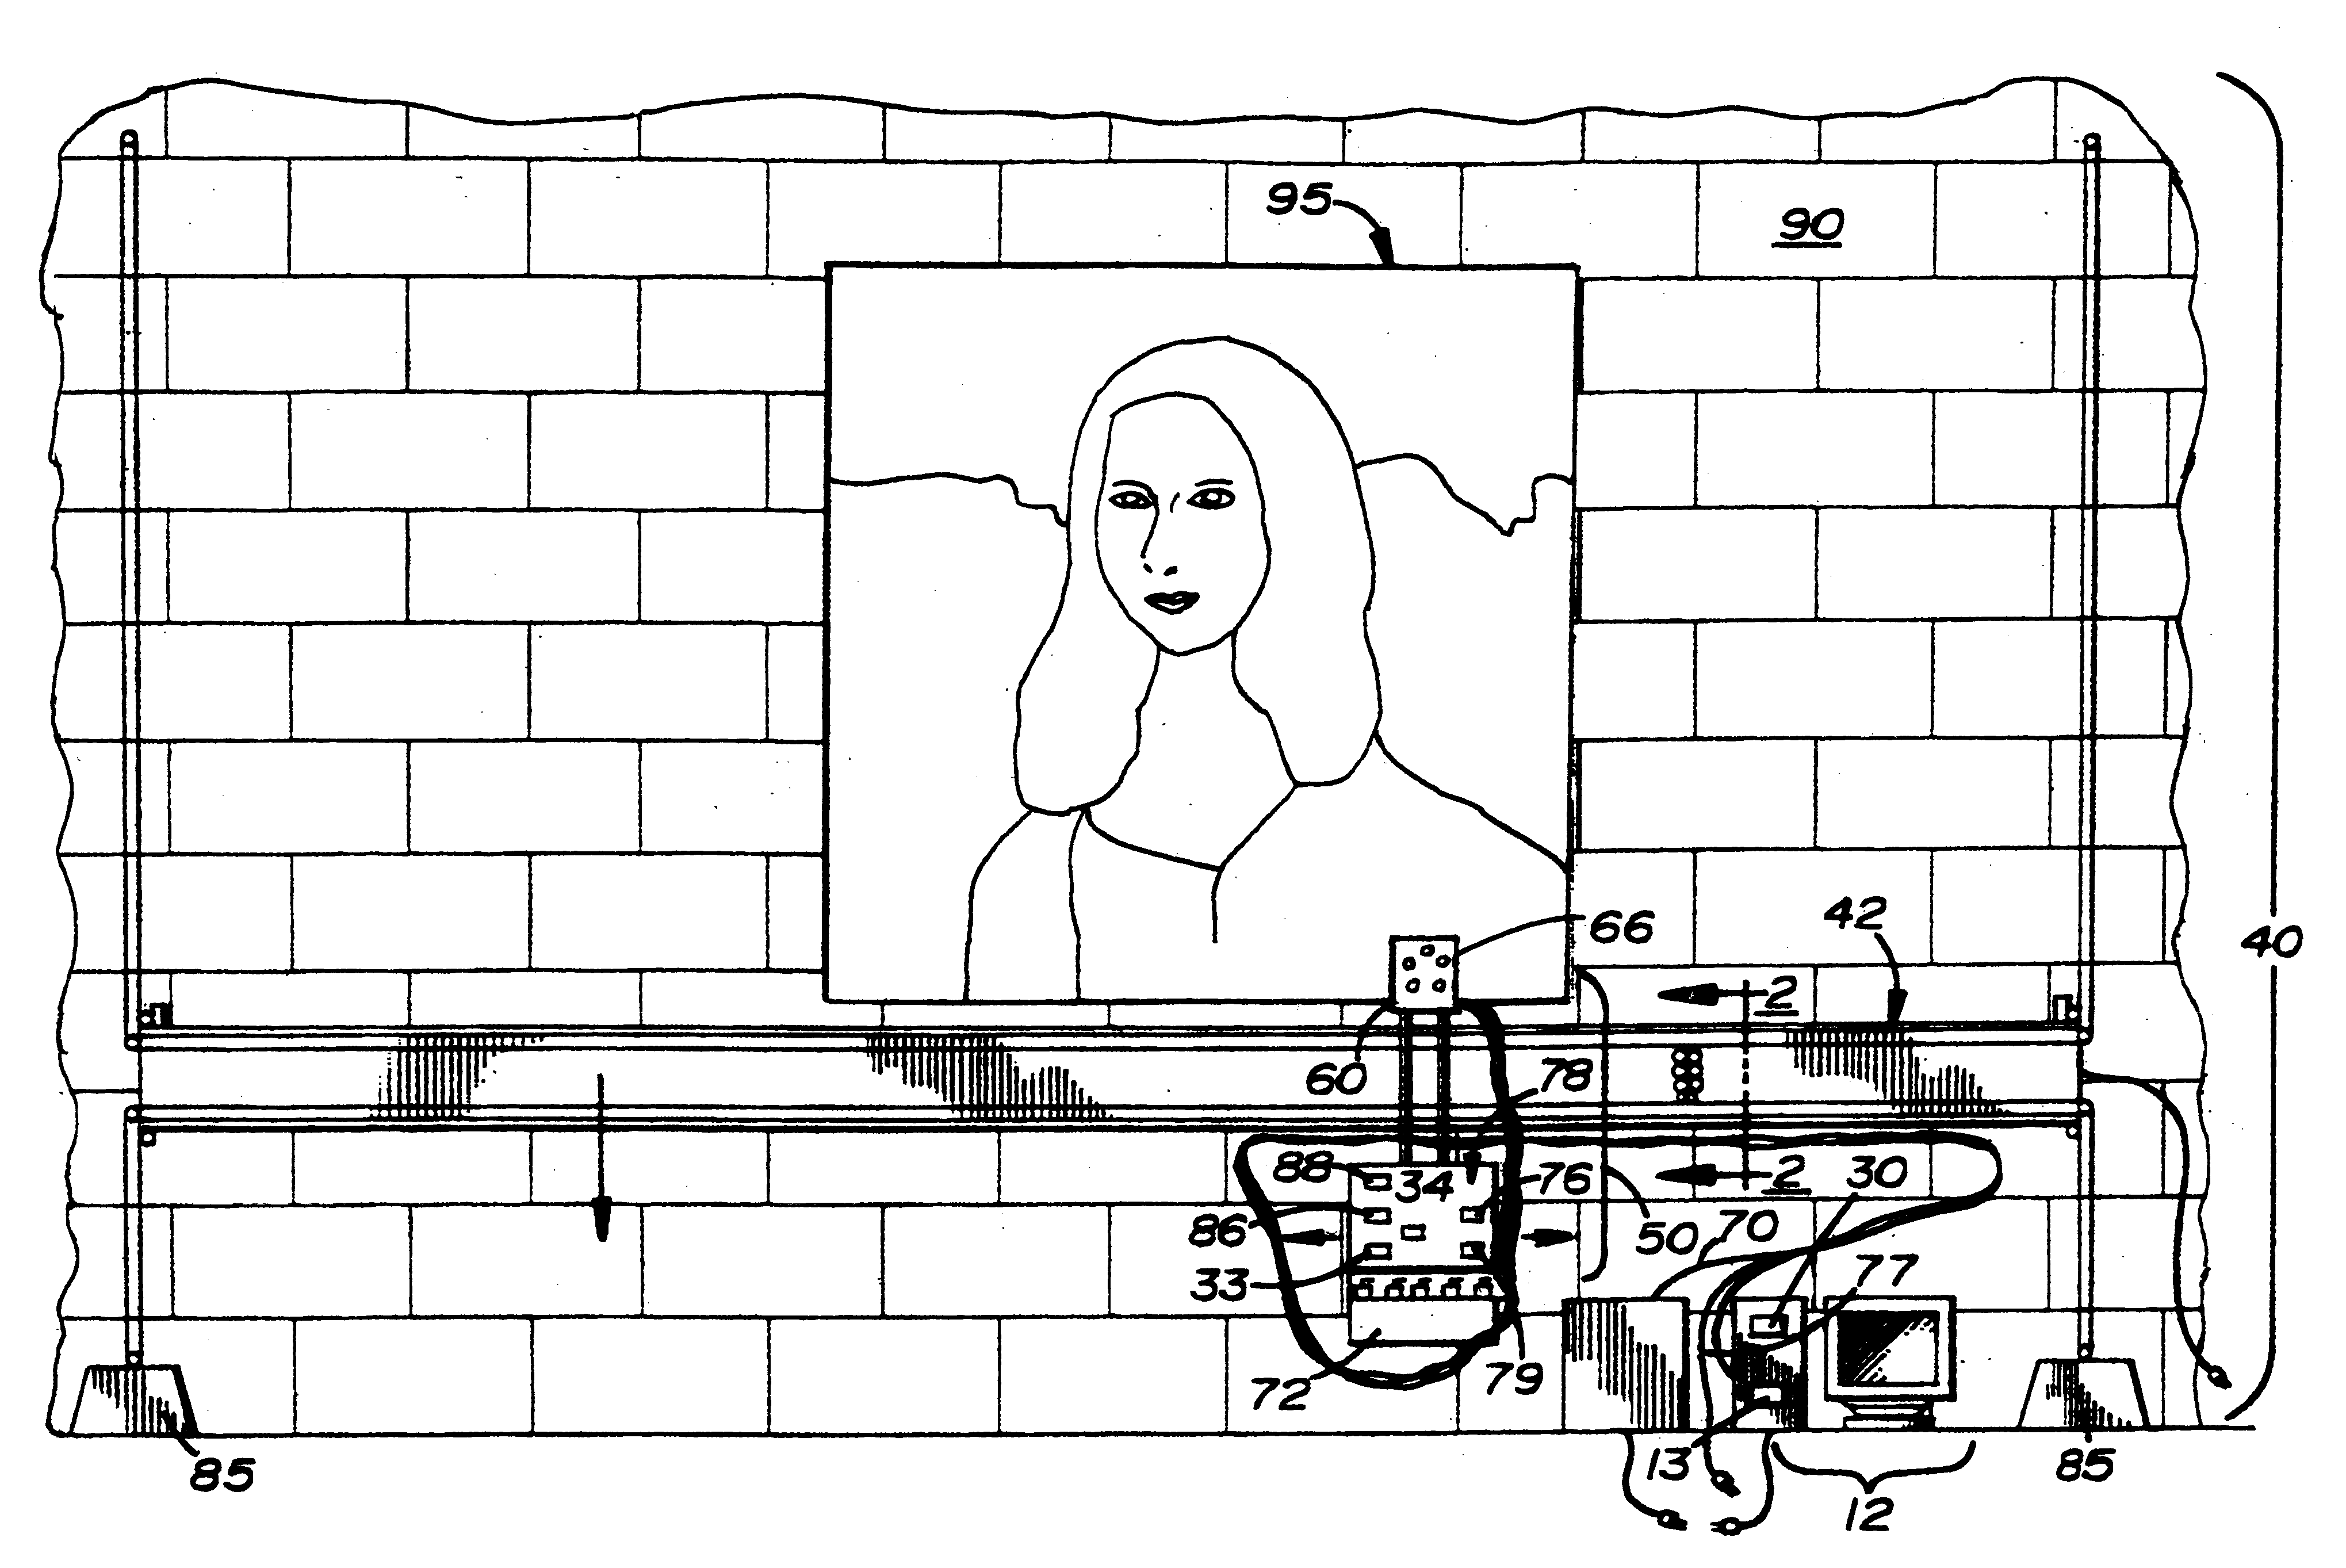 Large surface image reproduction system